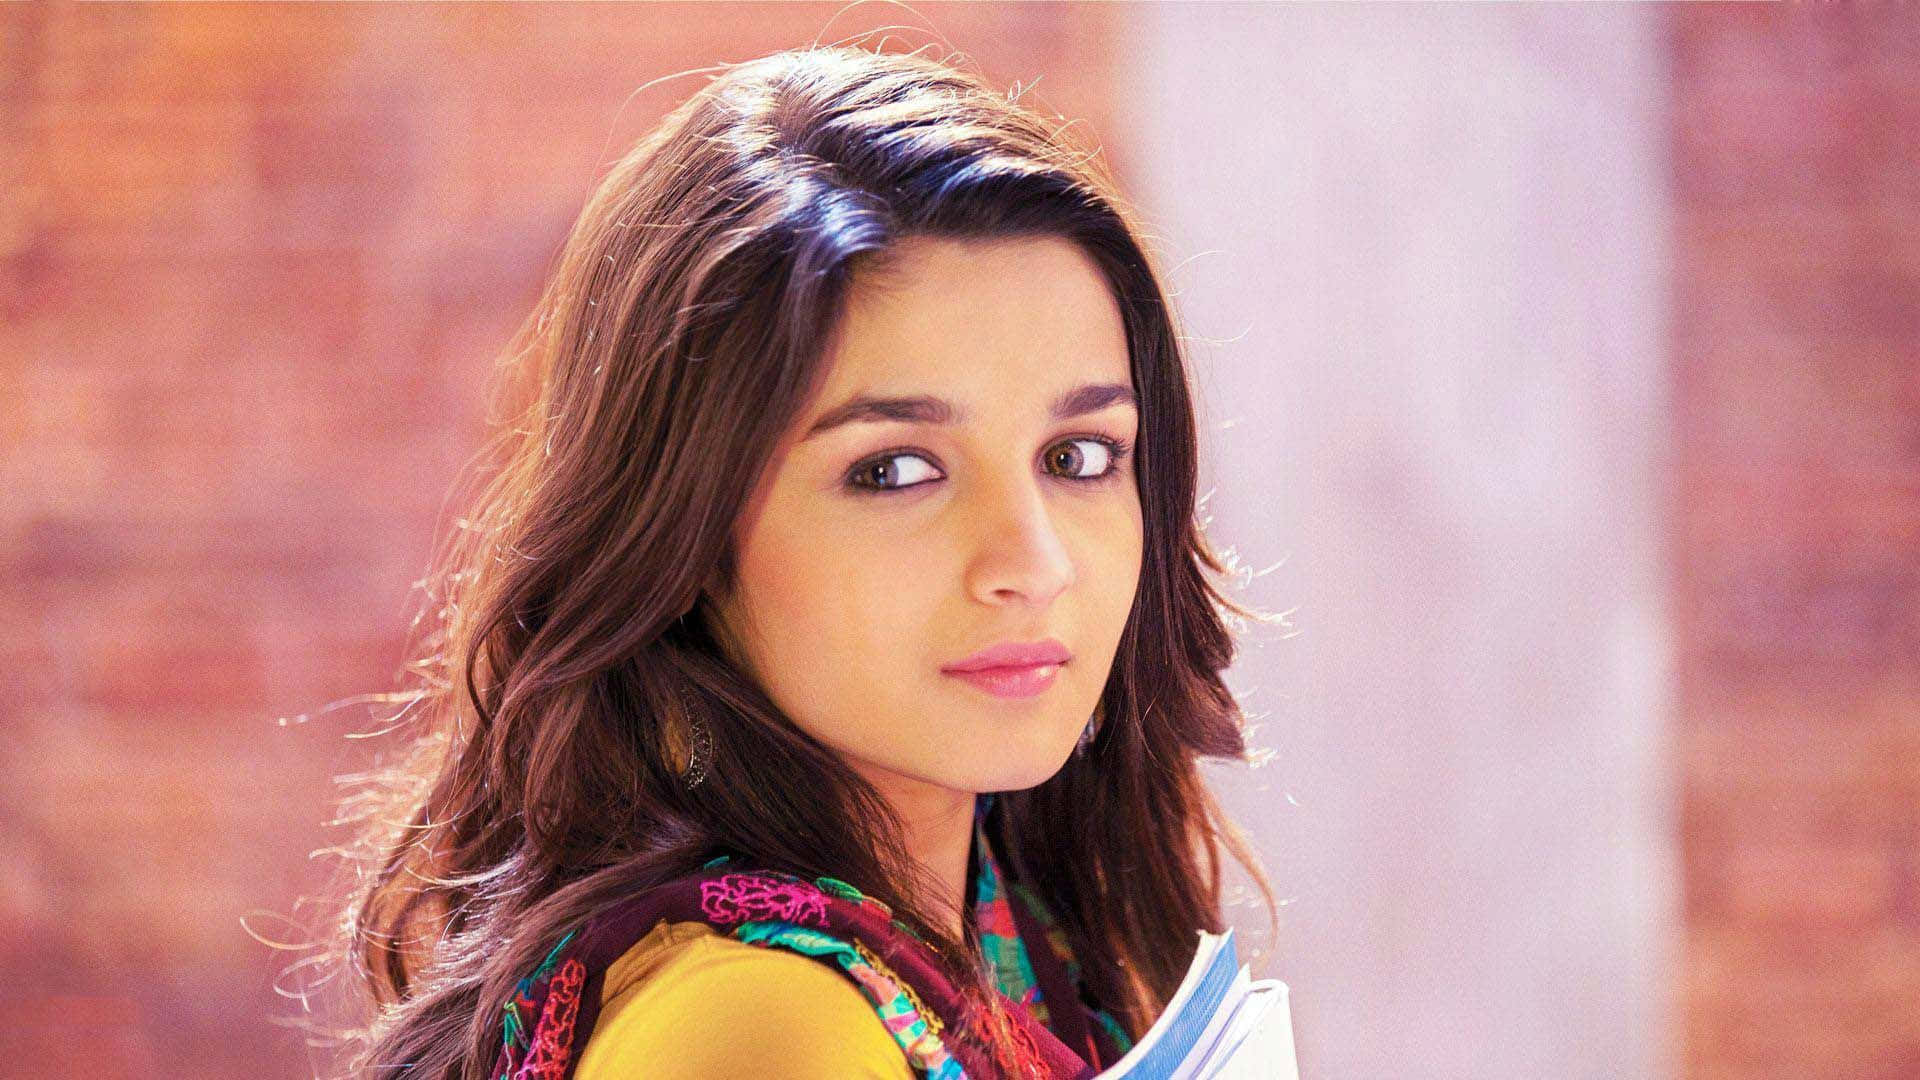 Alia Bhatt looking colorful and bright in her summery outfit